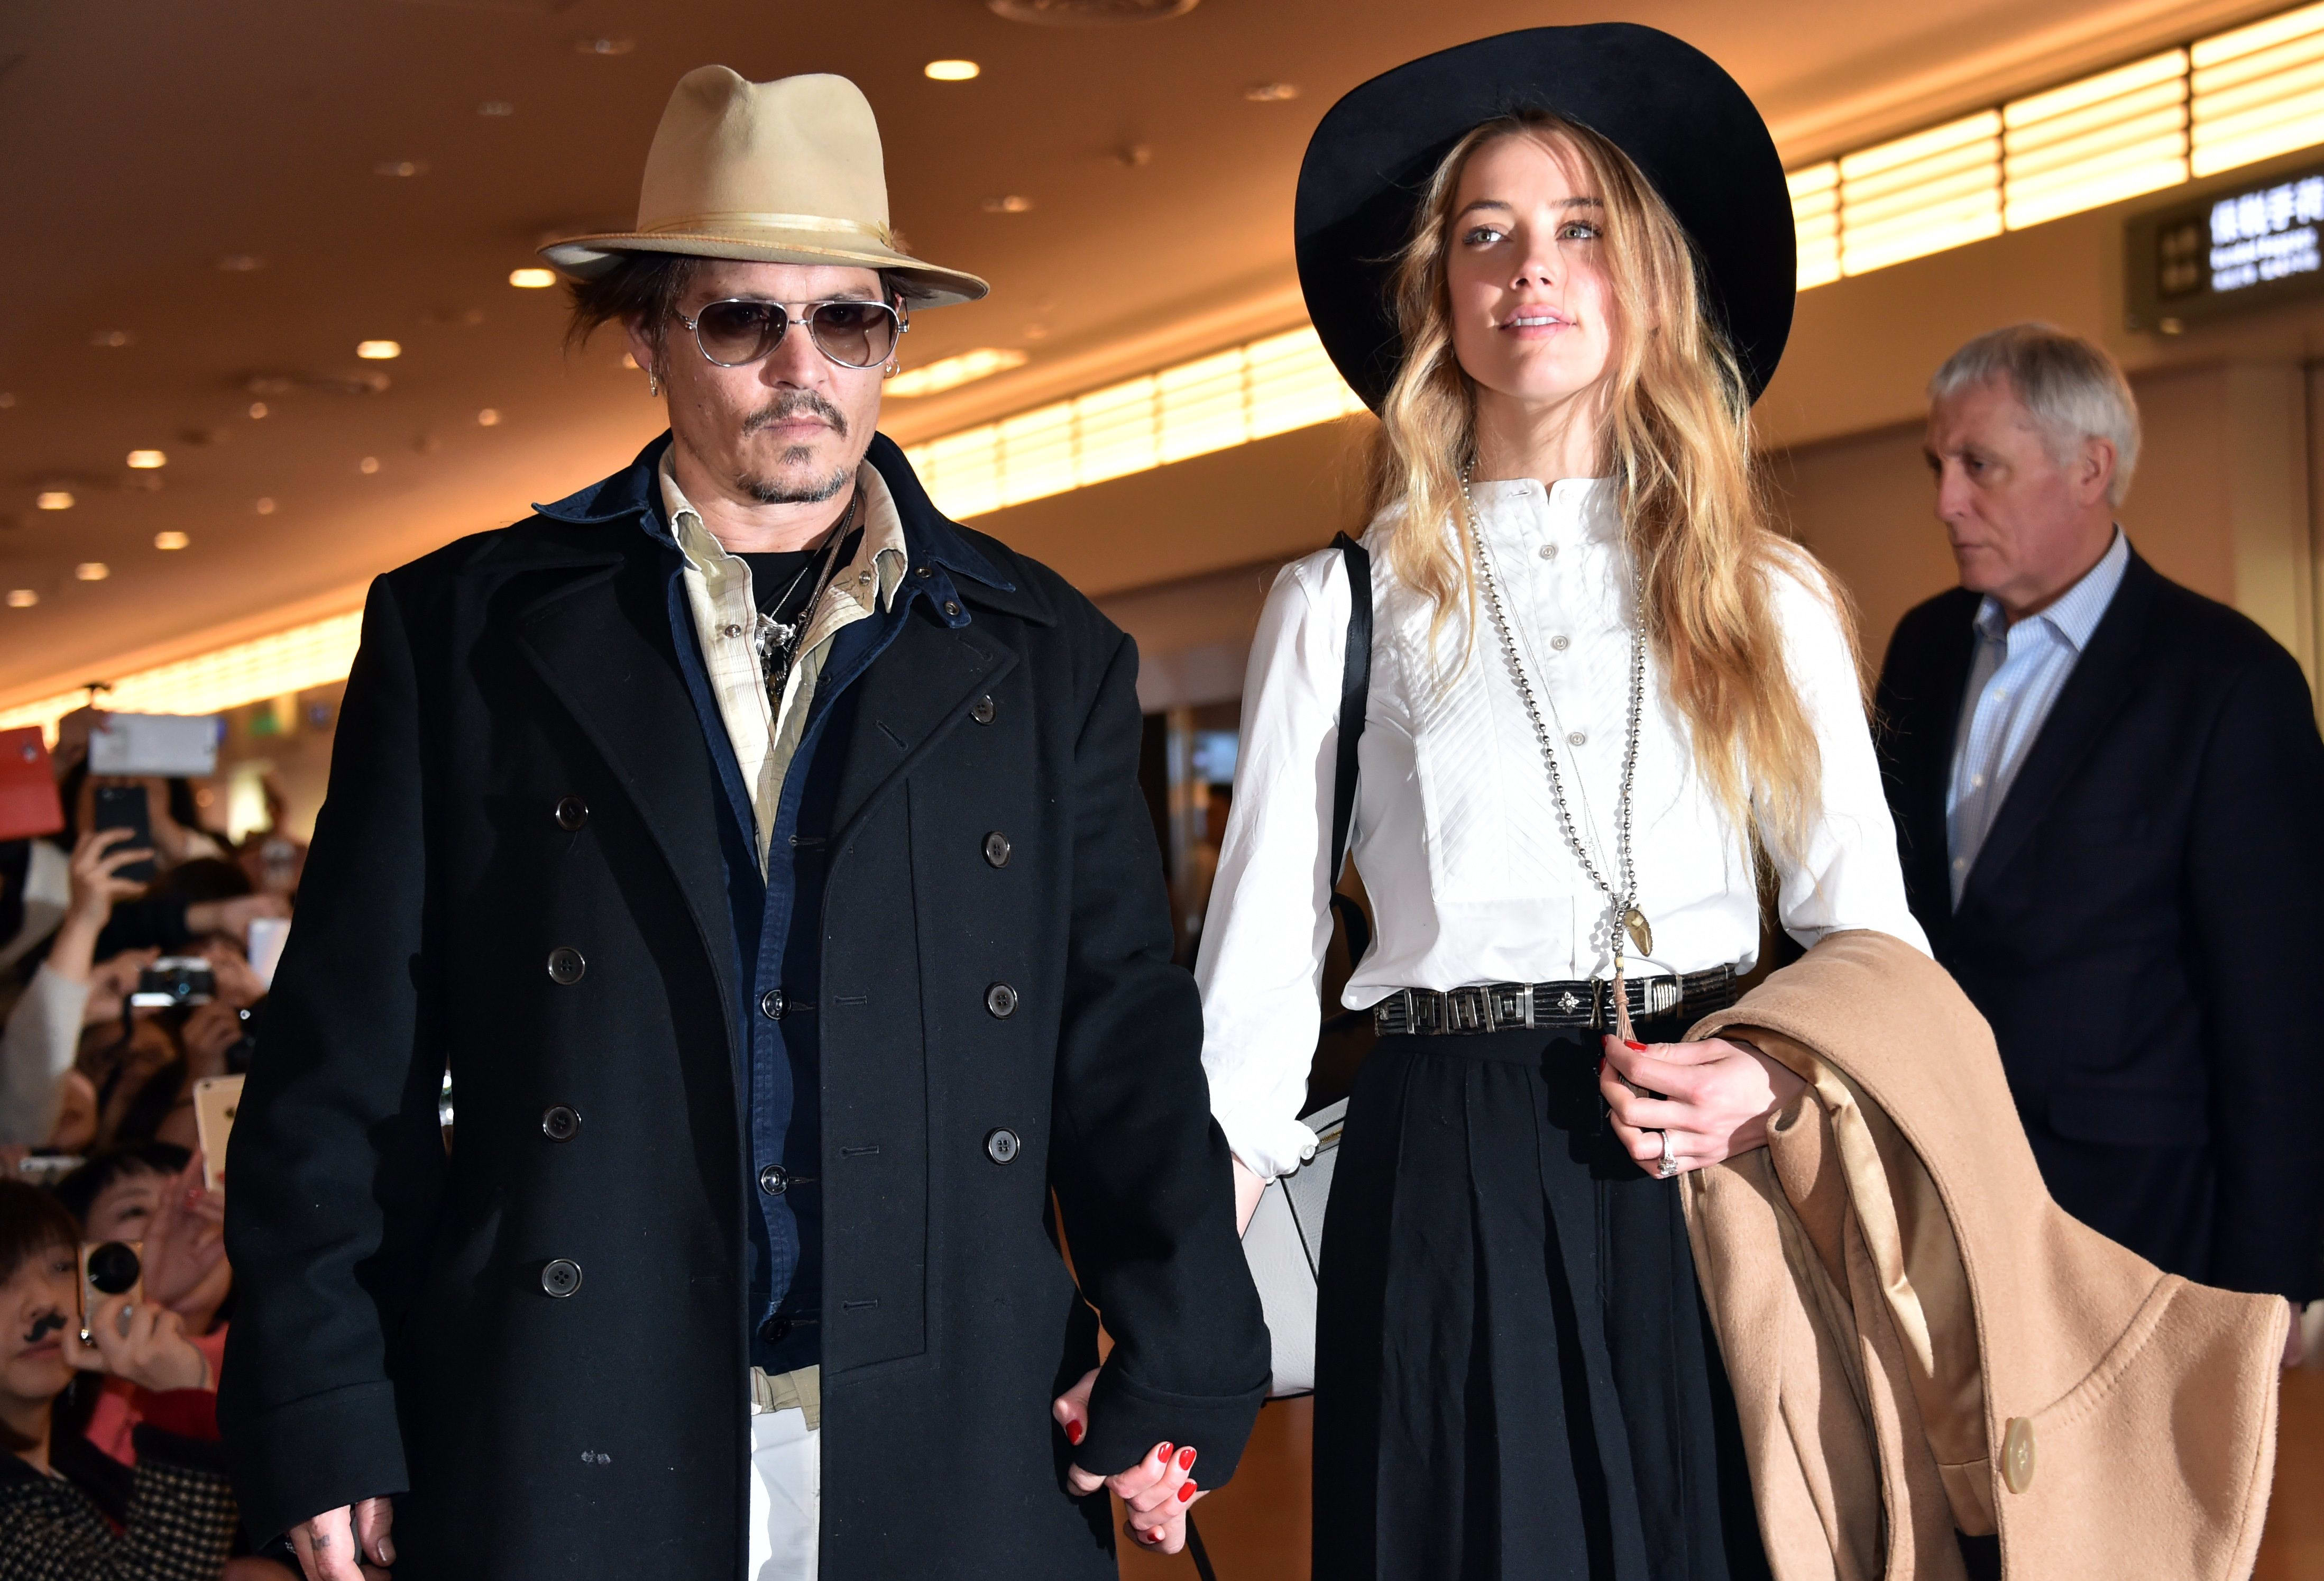 Johnny Depp, accompanied by his then-fiancee Amber Heard, at Tokyo International Airport on 26 January 2015.